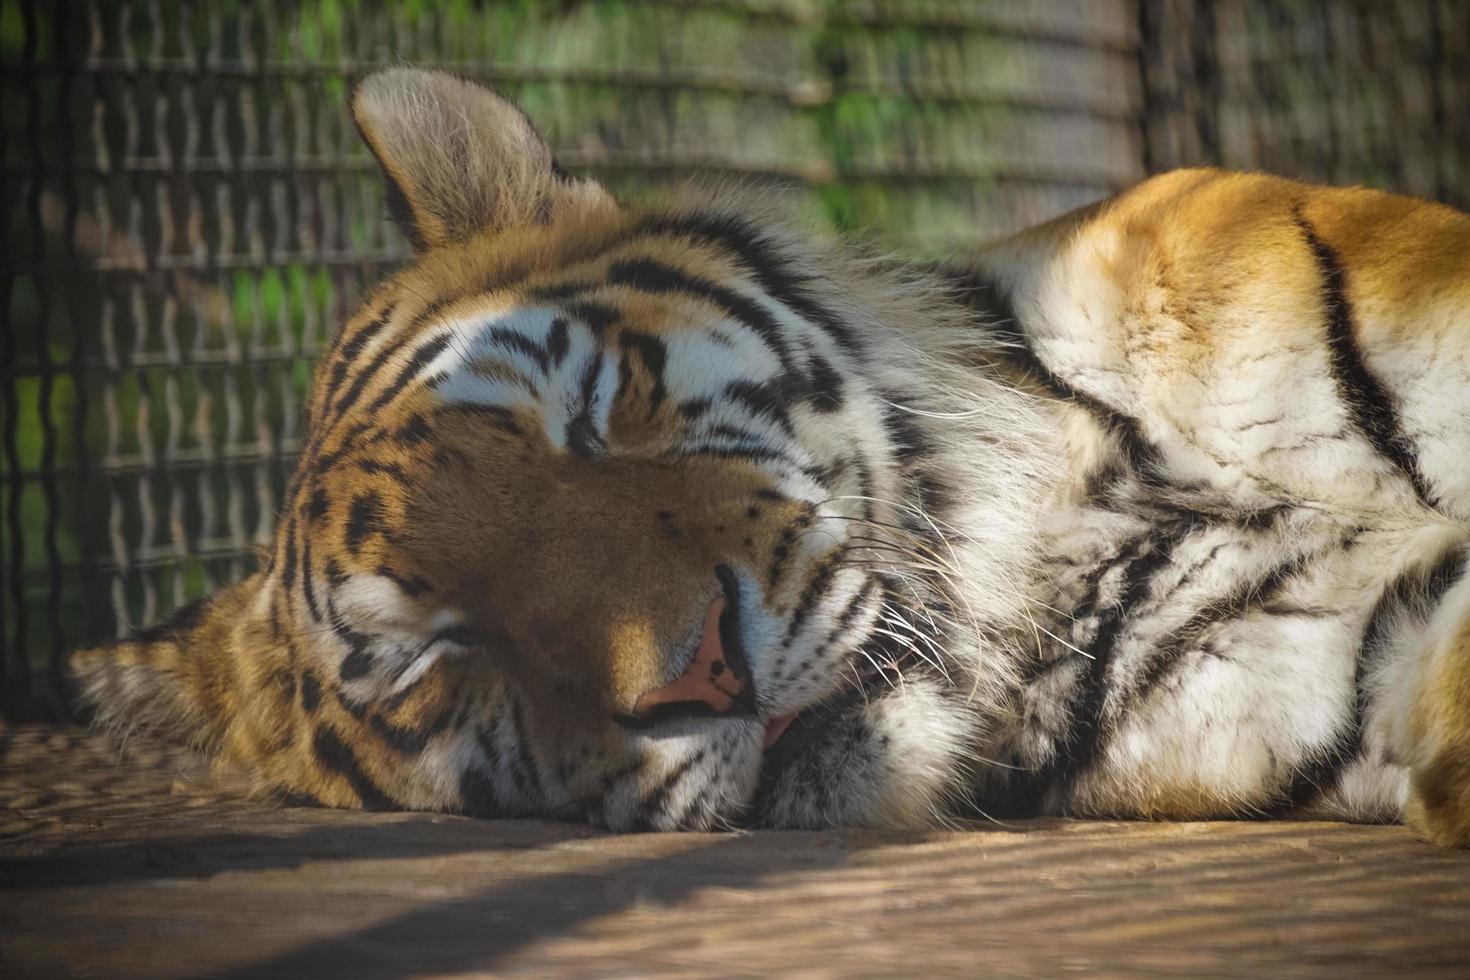 Portrait of a sleeping tiger close-up photo